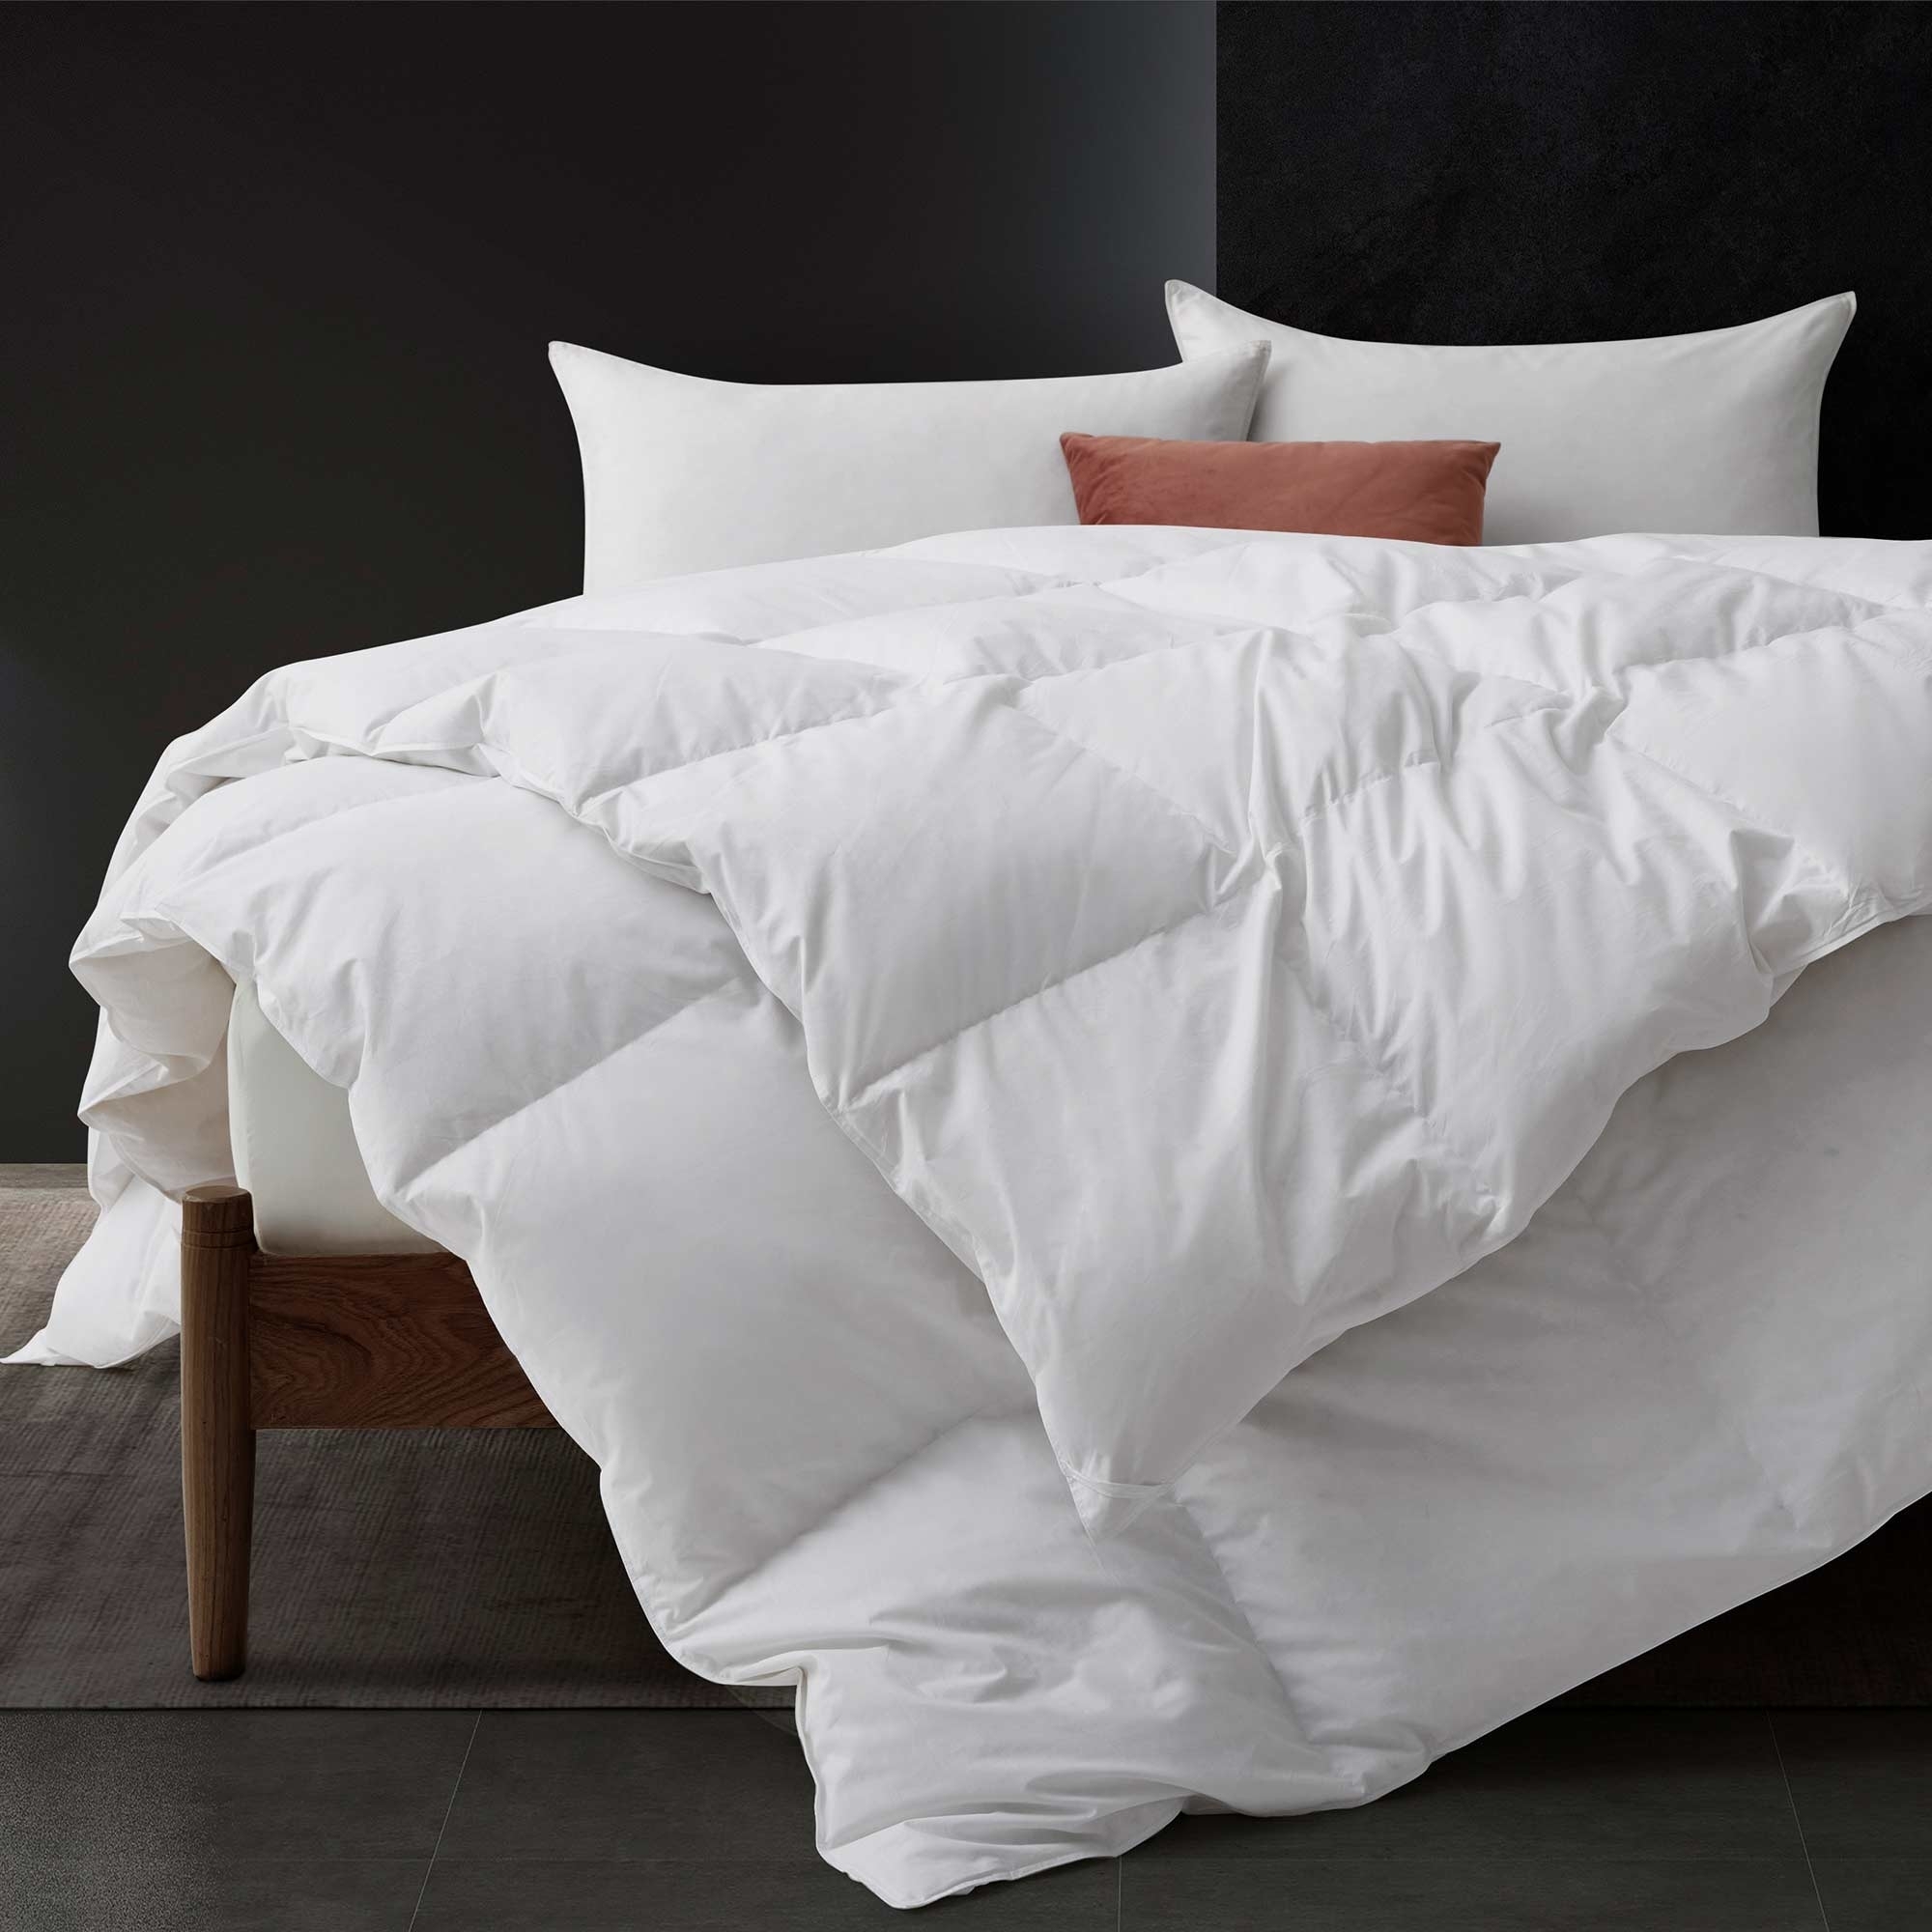 White Goose Feather And Down Comforters, Lightweight And Medium Weight Duvet Insert - Medium Weight, King